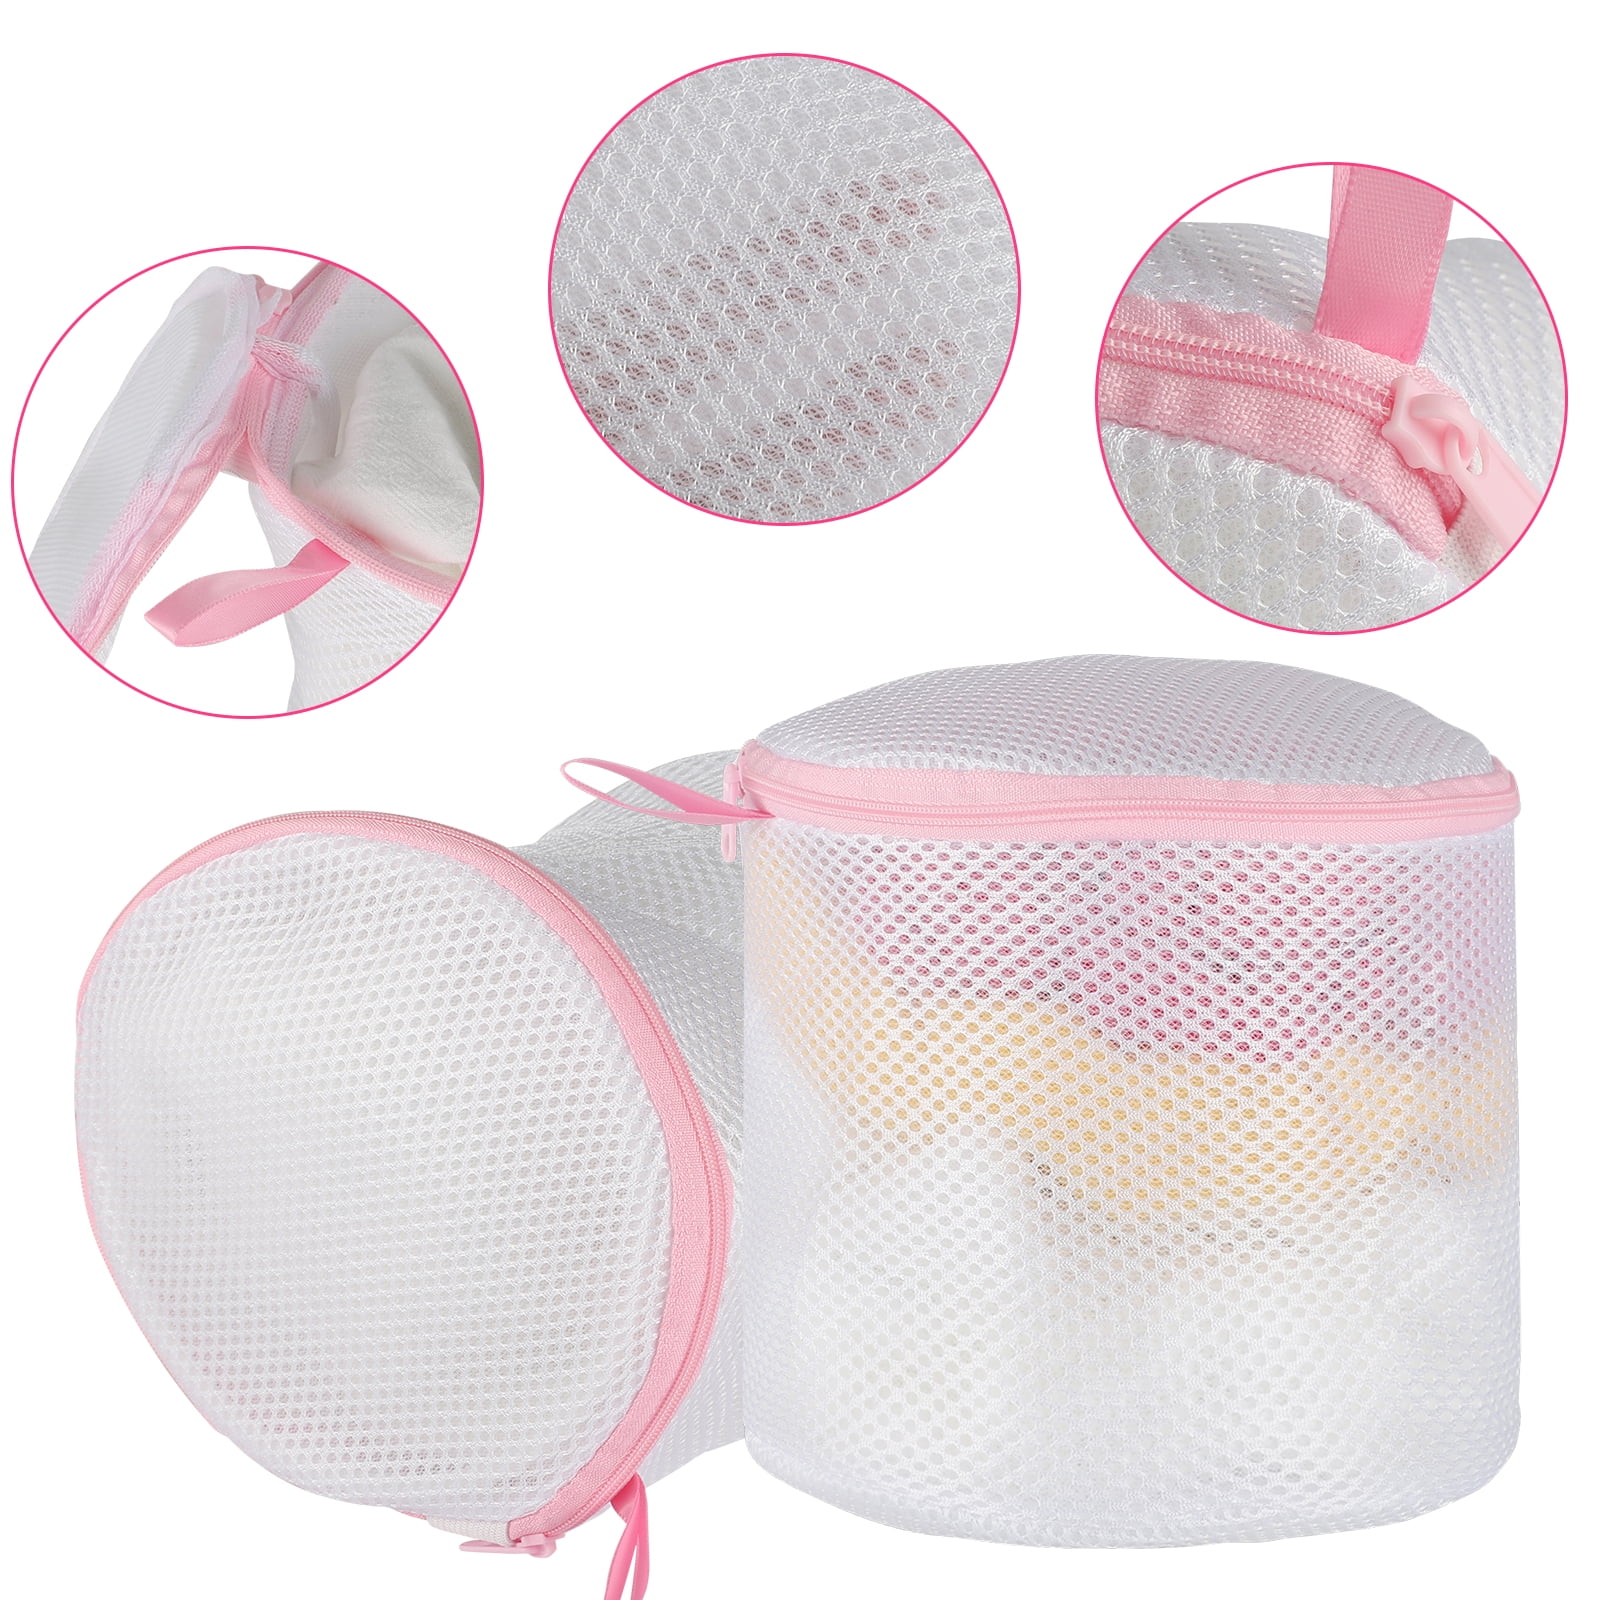 MJIYA Mesh Laundry Bags for Delicates with Premium Zipper, Travel Storage  Organize Bag, Clothing Washing Bags for Laundry, Blouse, Bra, Hosiery